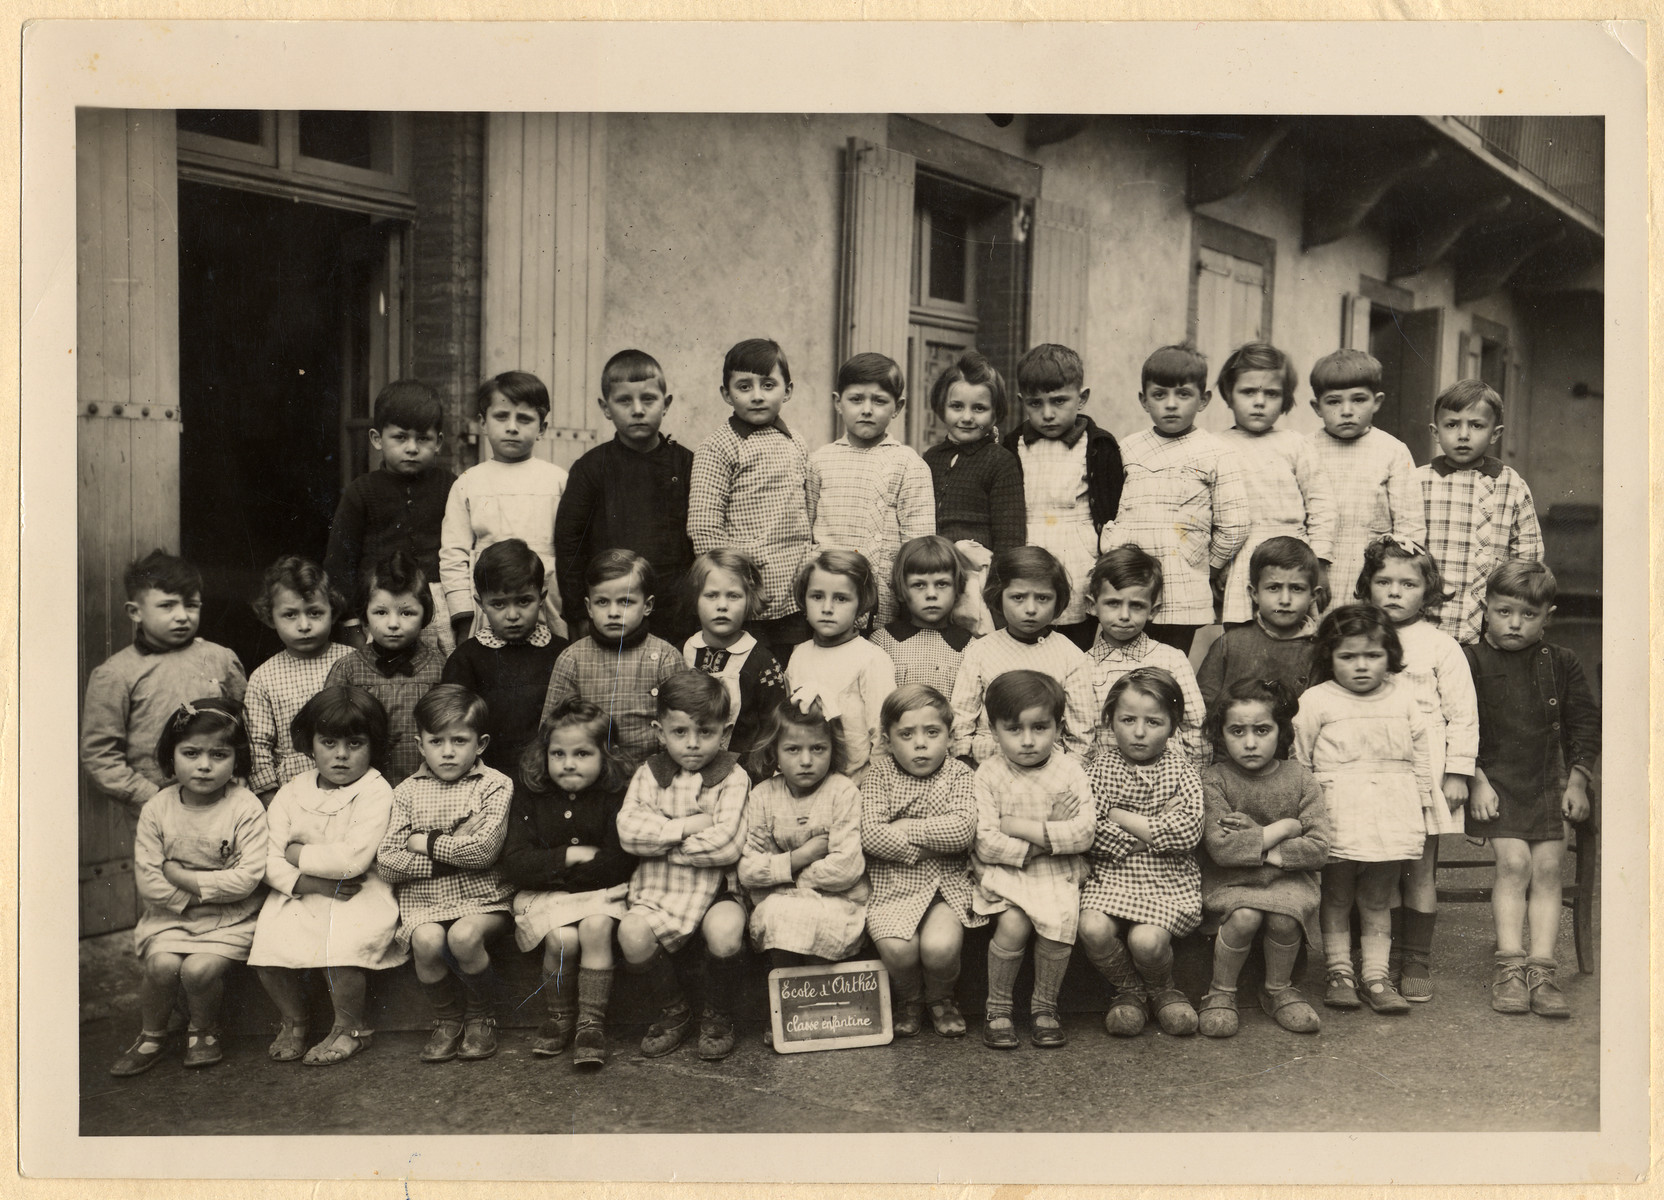 Class portrait of a kindergarten in Paris.

Among those pictured is Stephanie Bujakowski (second row, sixth from the left).  She was murdered a few years later in Auschwitz.